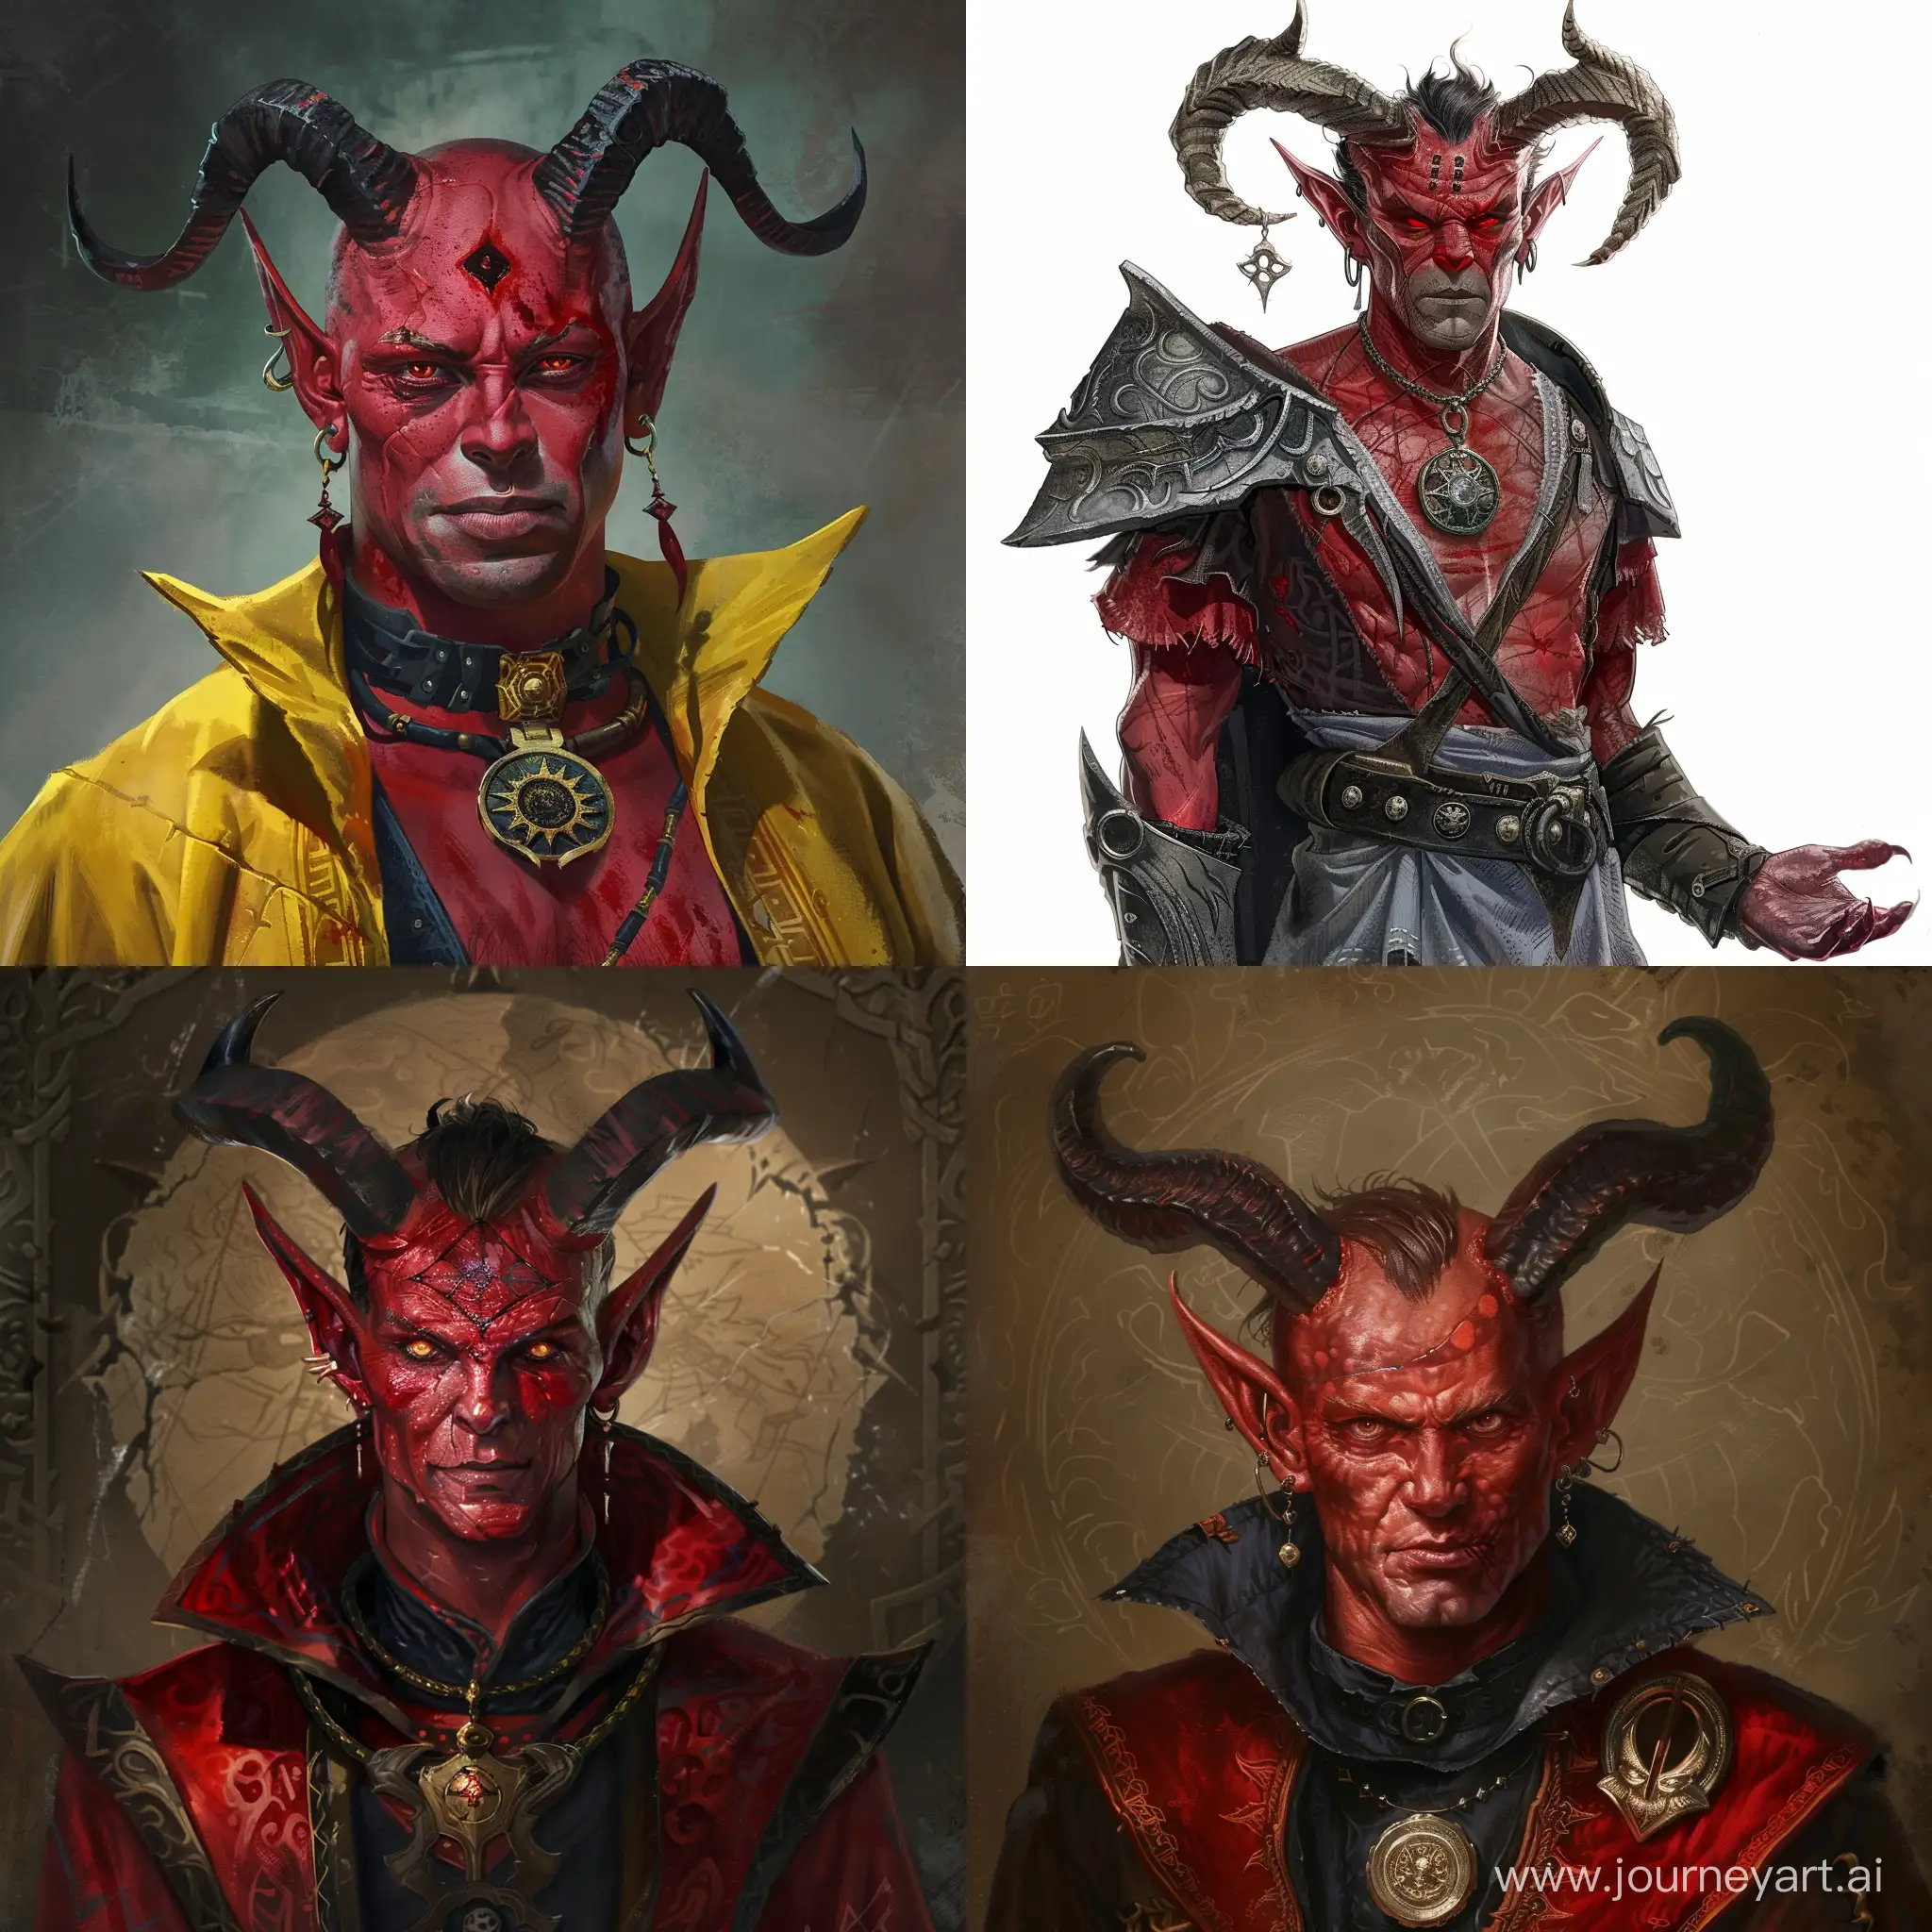 Draw a character from the Dungeons and Dragons universe according to the following description: They are a demon from the village, red skin, 170 centimeters tall, horns. A cultist who became an apostle of the blood demon . The mark of the contract is in the eye. The equipment contains an amulet inherited from his father, which contains secret energy